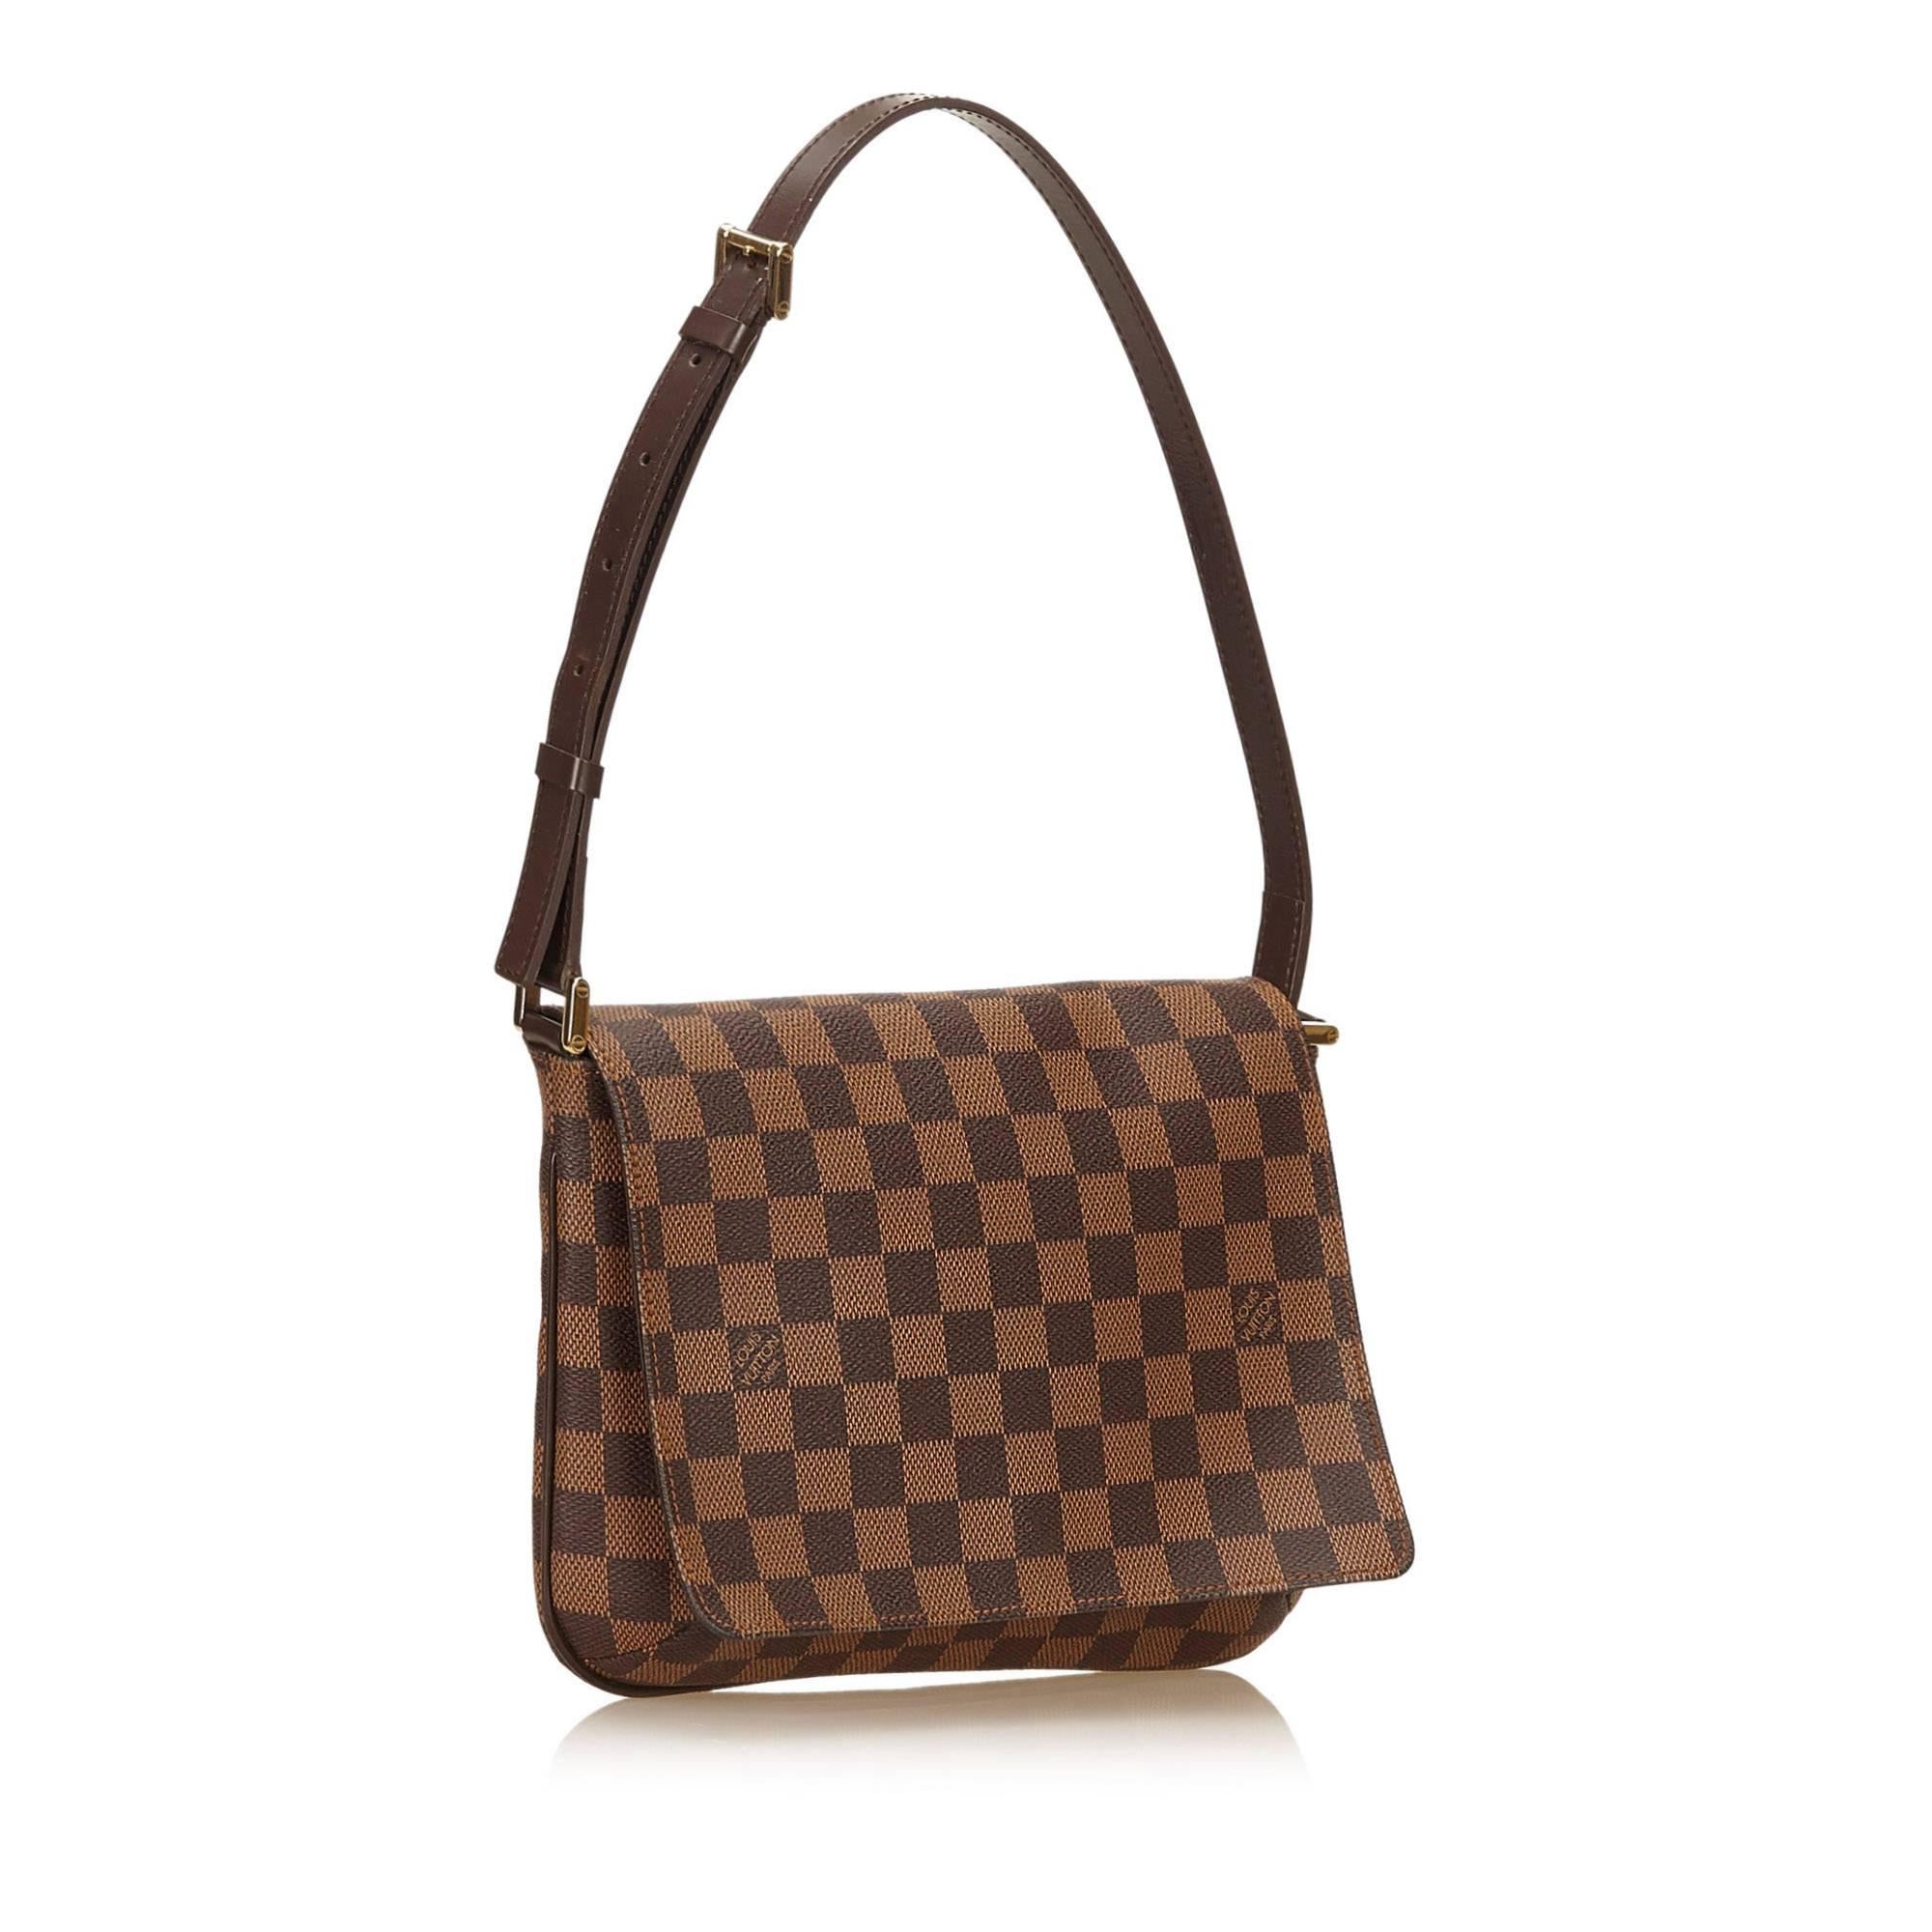 The Musette Tango features a damier ebene canvas body, a leather shoulder strap, a front flap with a magnetic closure, and an interior slip pocket. It carries a B condition rating.

Inclusions: 
This item does not come with inclusions.